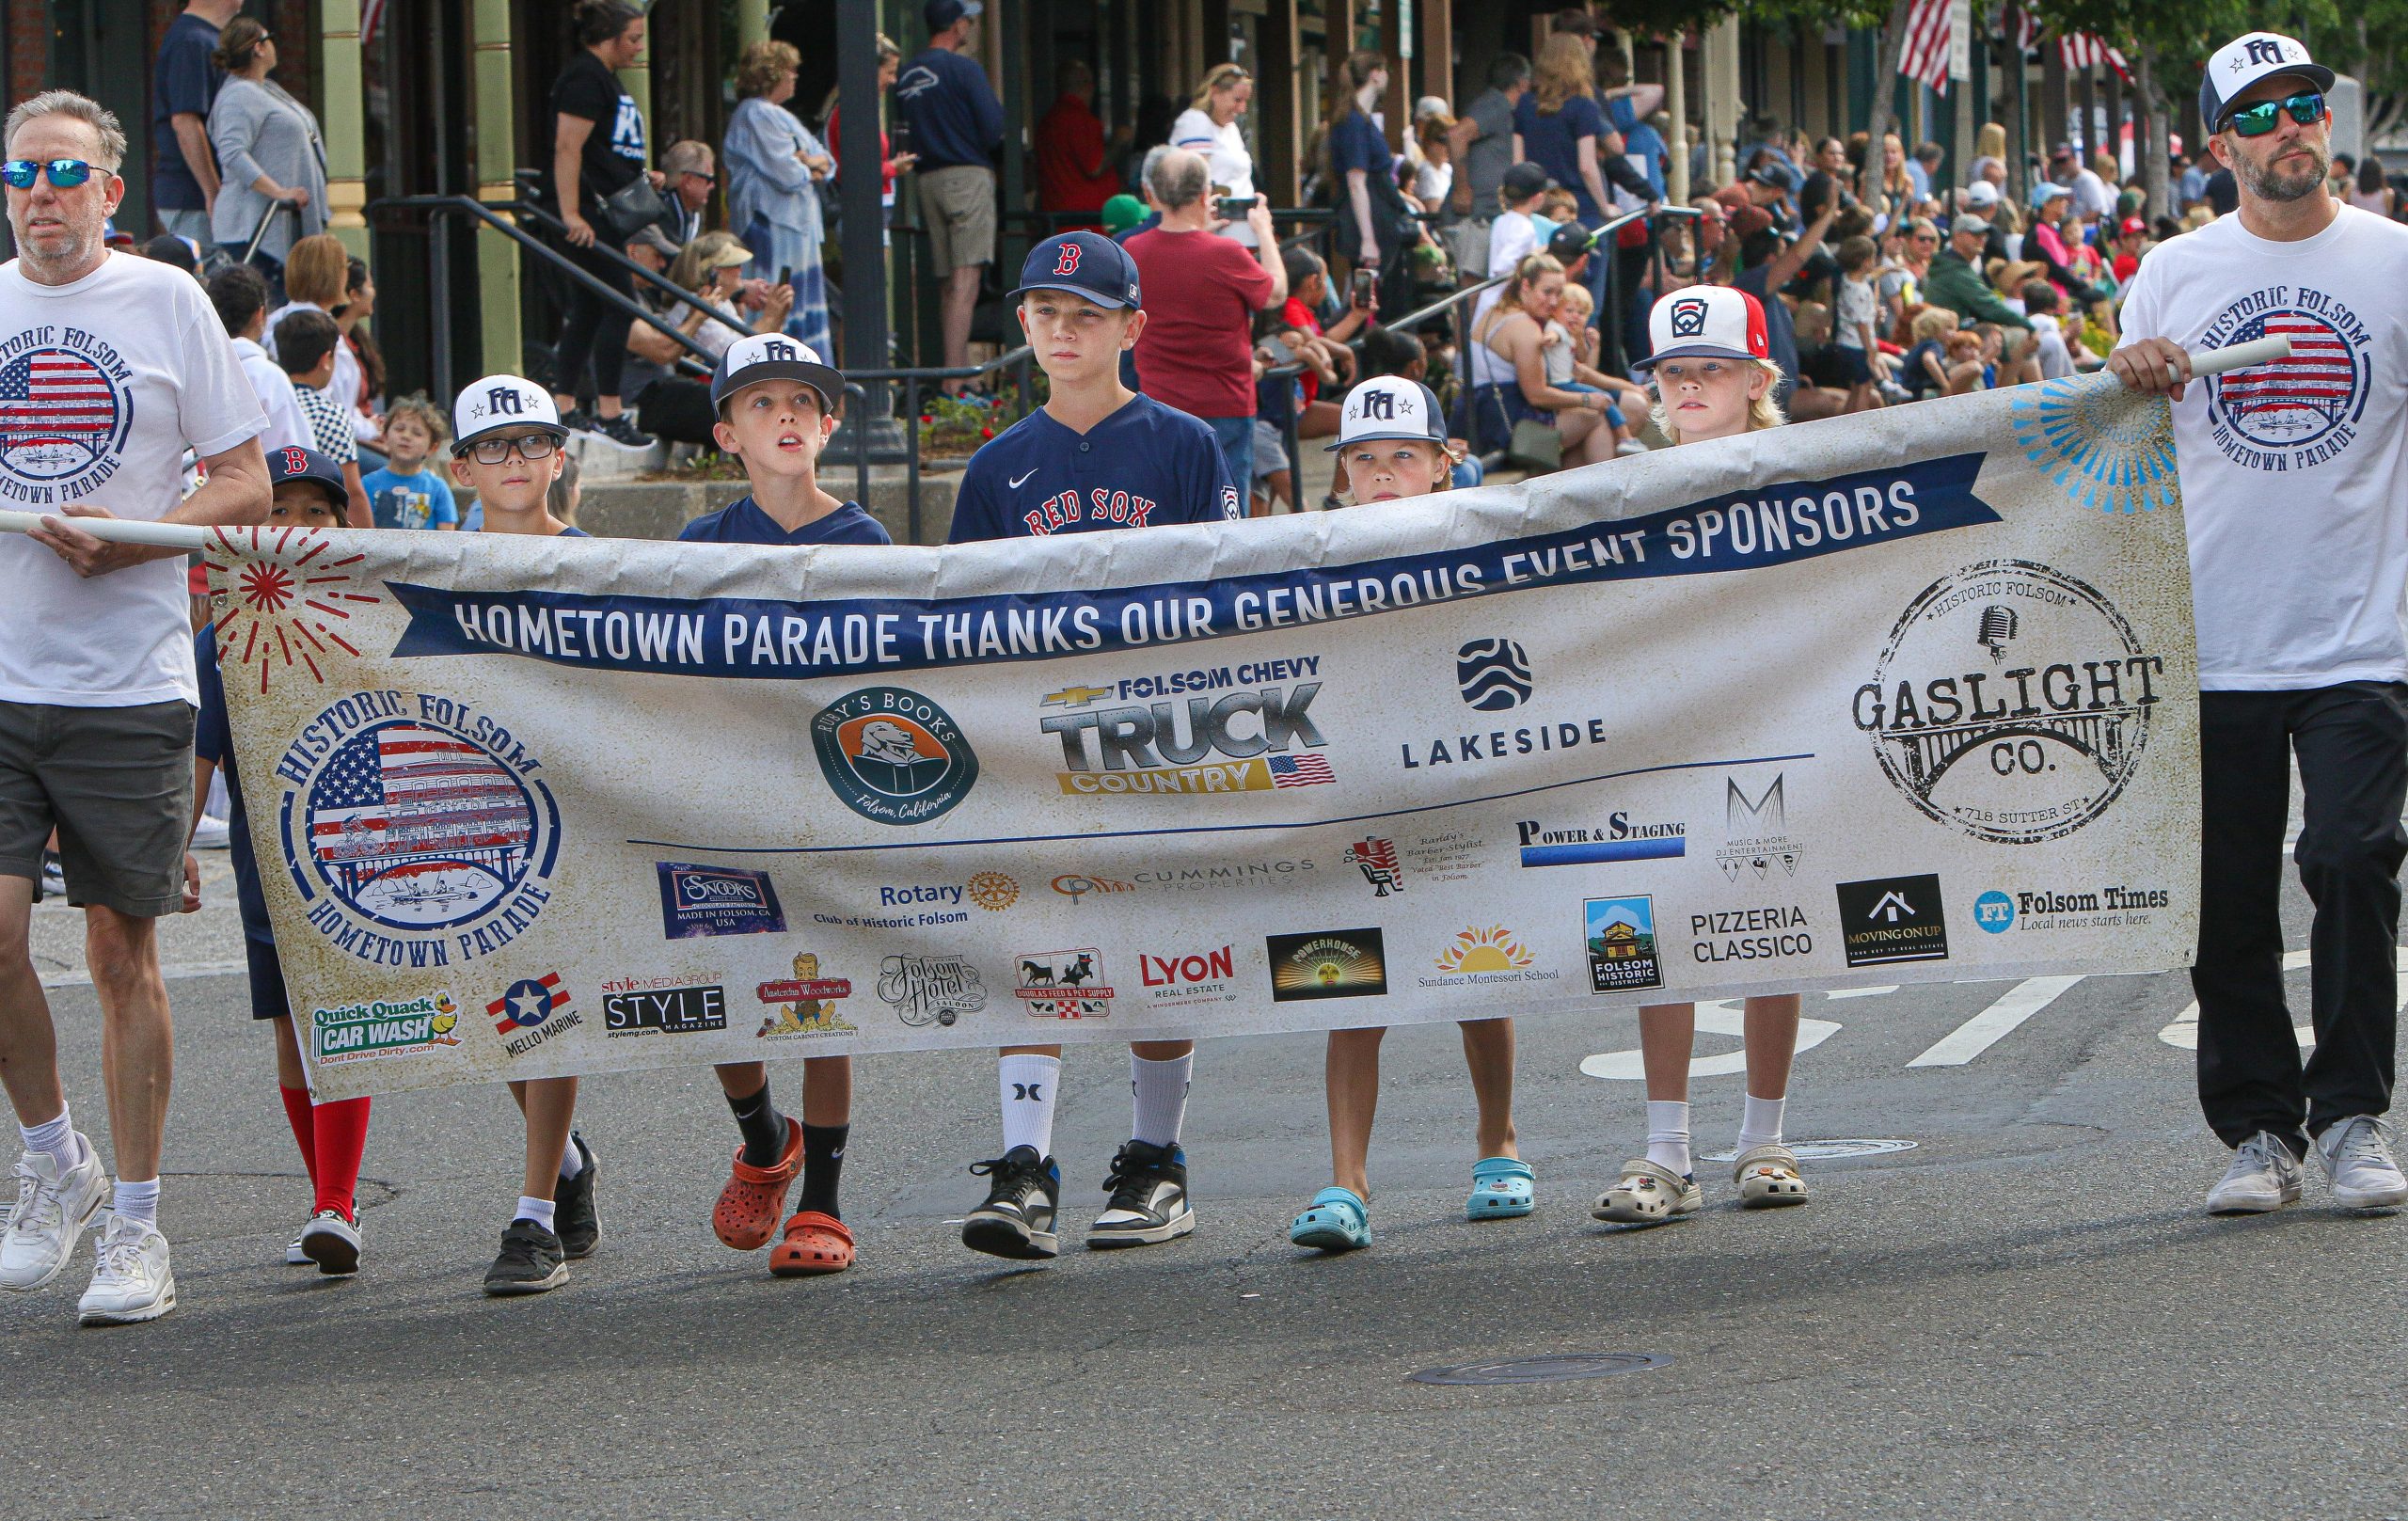 VIDEO: Watch the entire Historic Folsom Hometown parade here and see the photos!